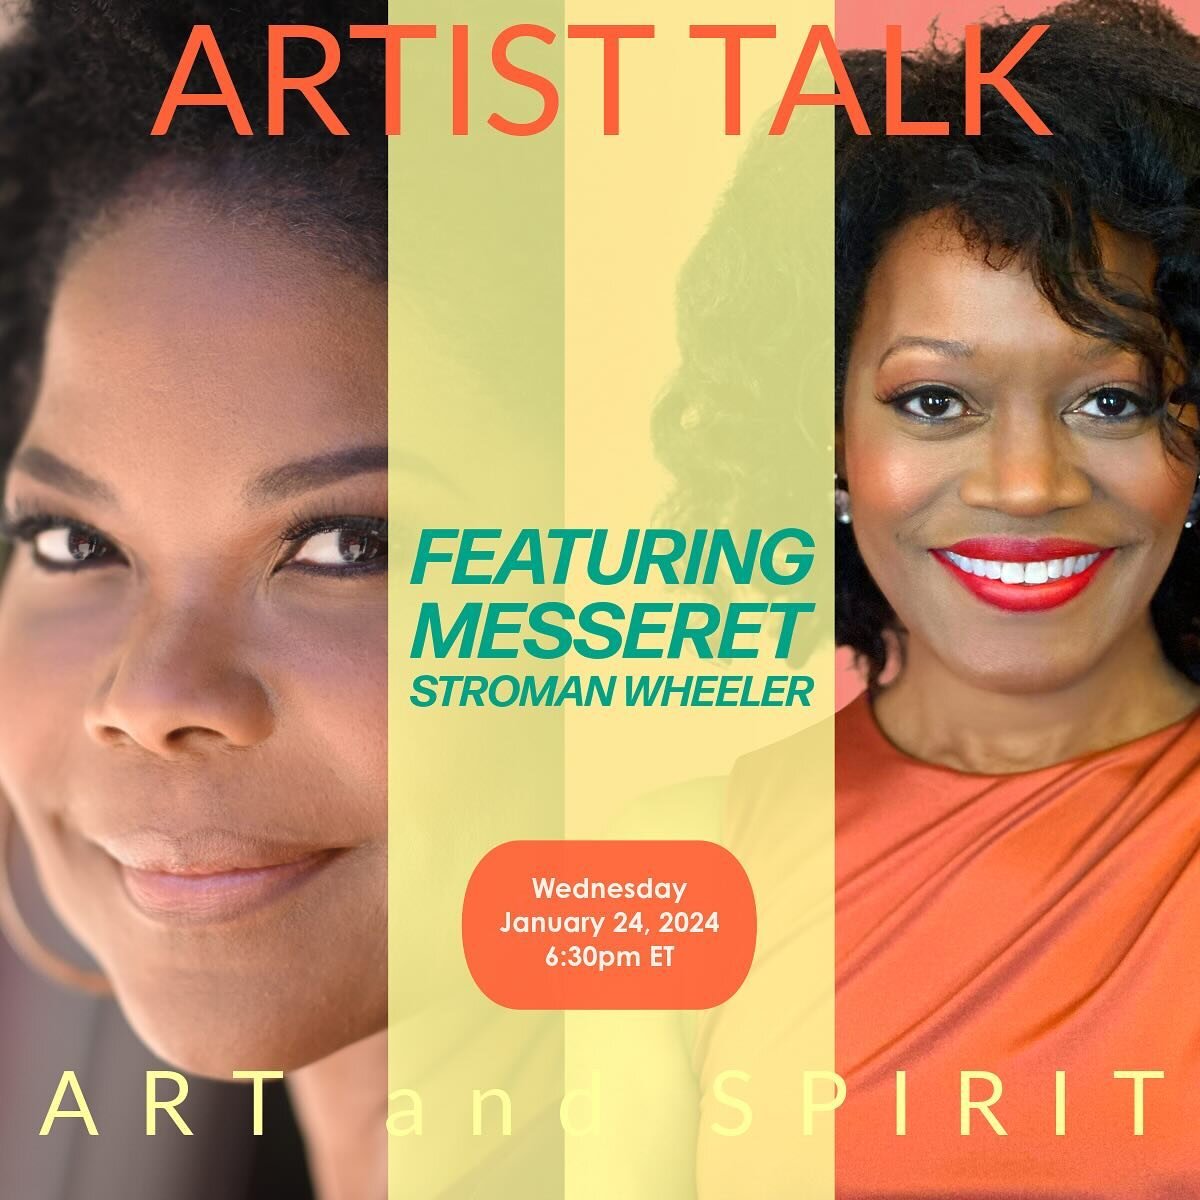 ✨ It brings me great joy to be chatting with my dear beautiful and talented friend Angela Robinson @angelarobschild !!!
Join us tomorrow at 6:30 pm EST here on IG for an exciting conversation!!! See you there.✨